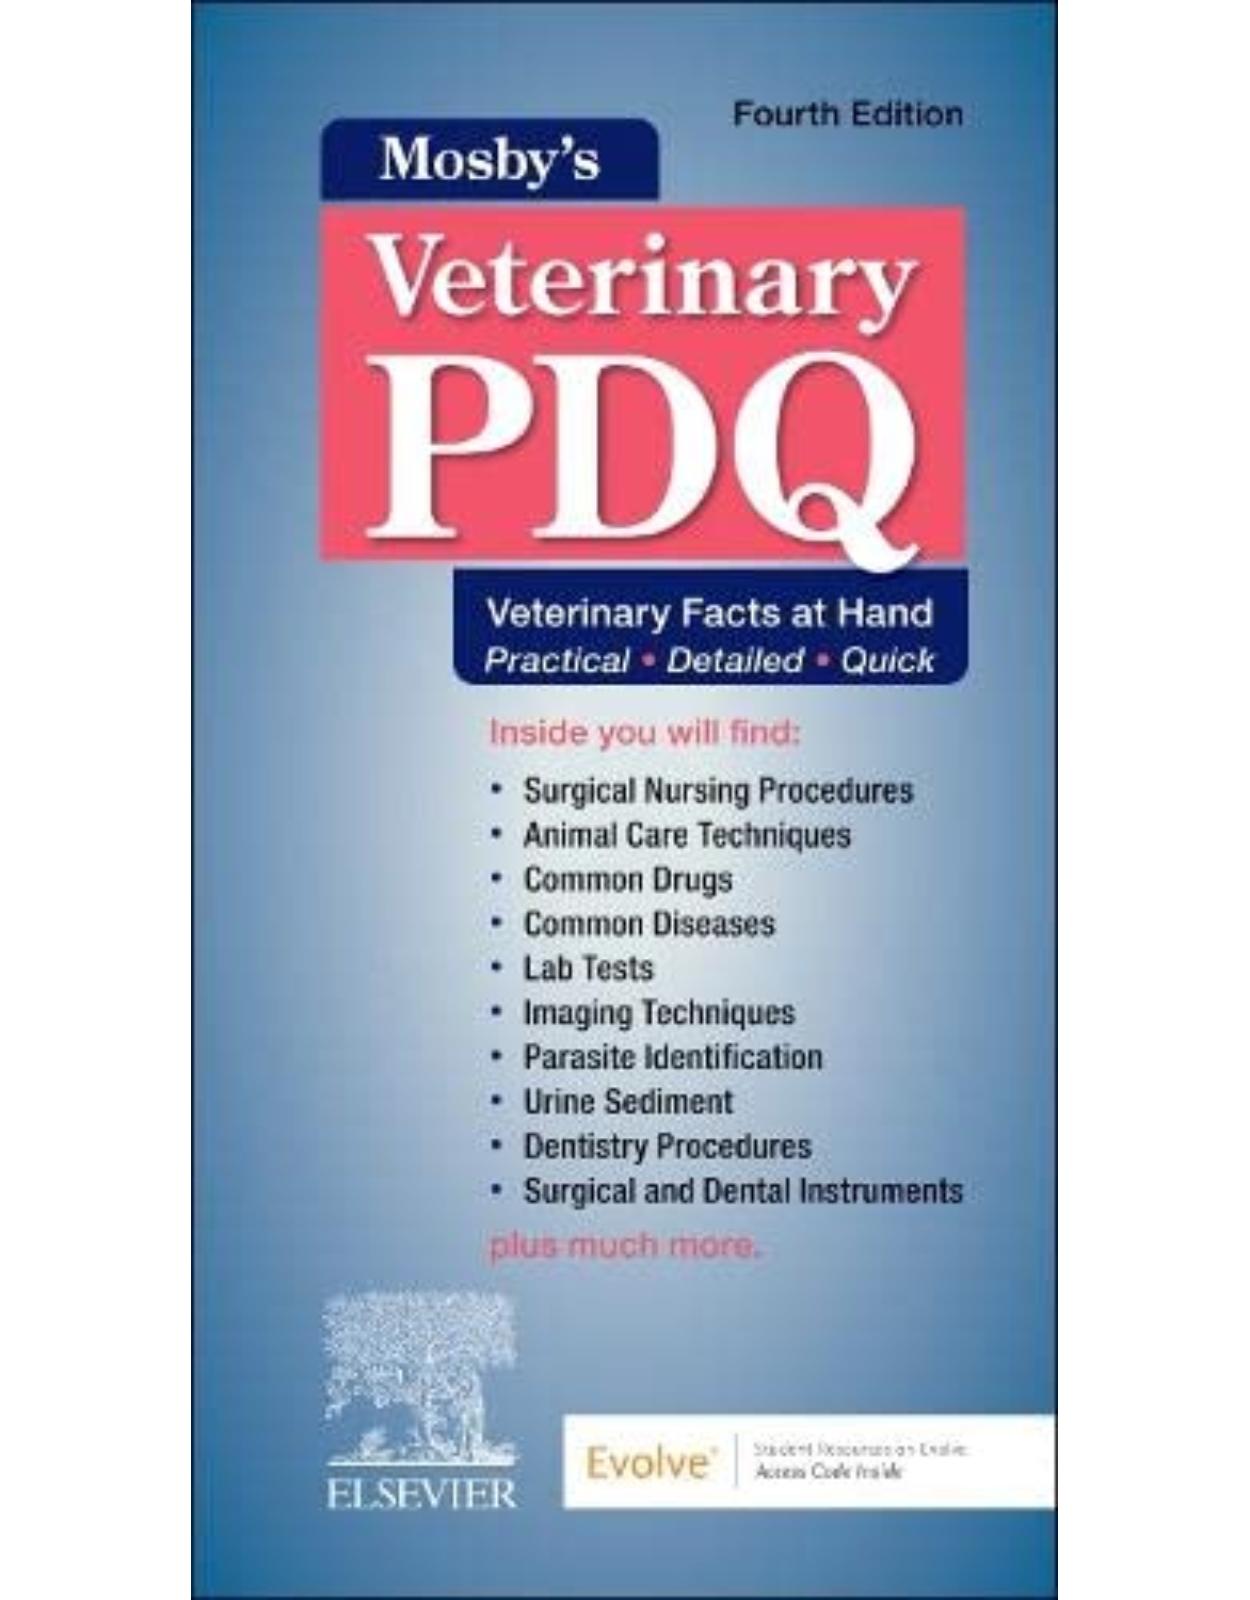 Mosby’s Veterinary PDQ